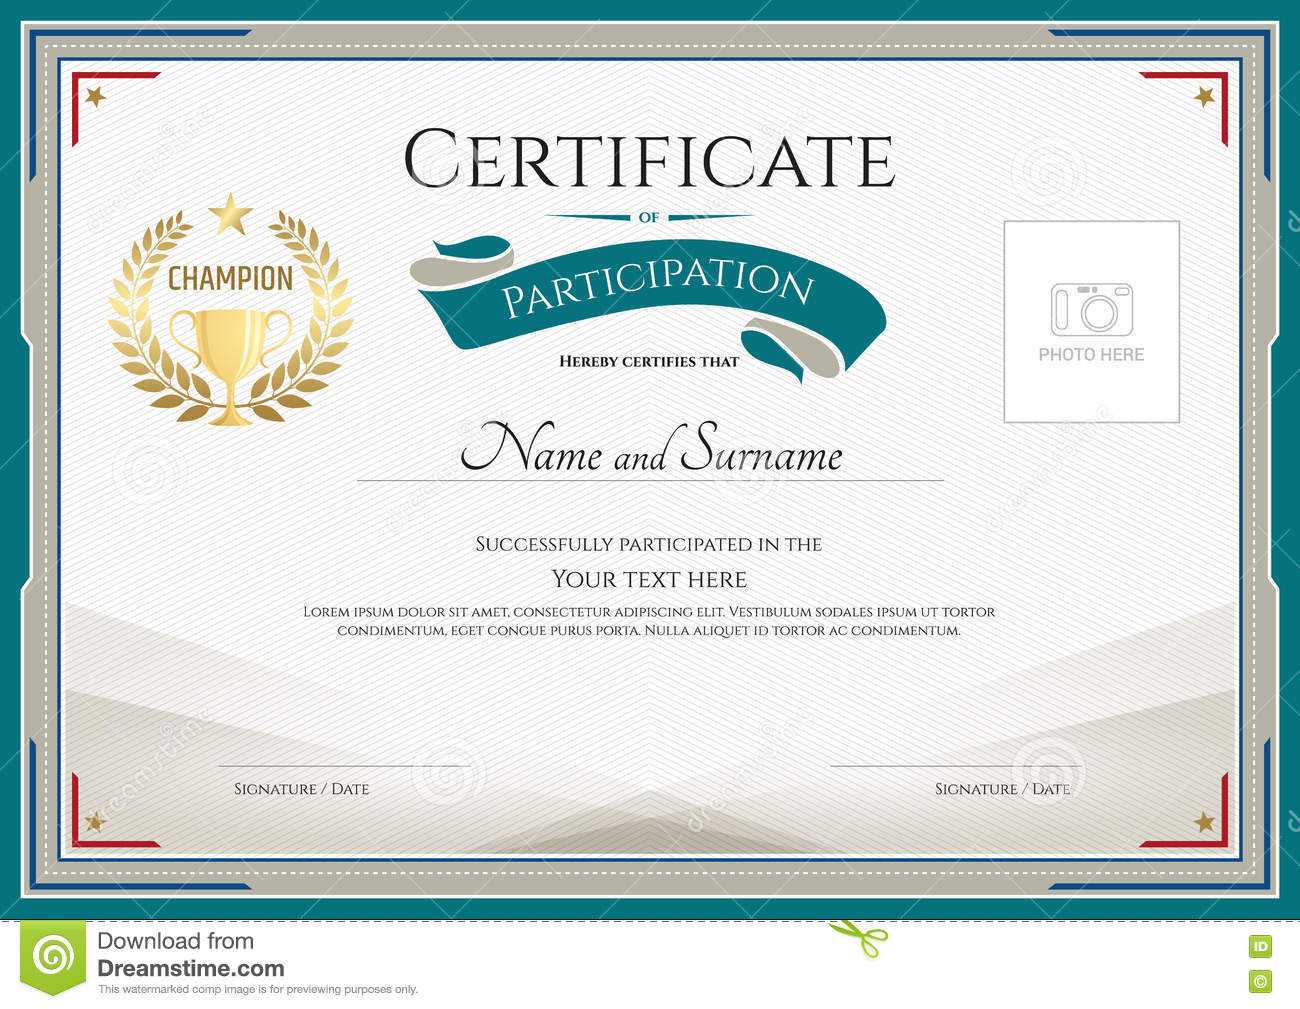 Certificate Of Participation Template With Green Broder Regarding Blank Certificate Templates Free Download